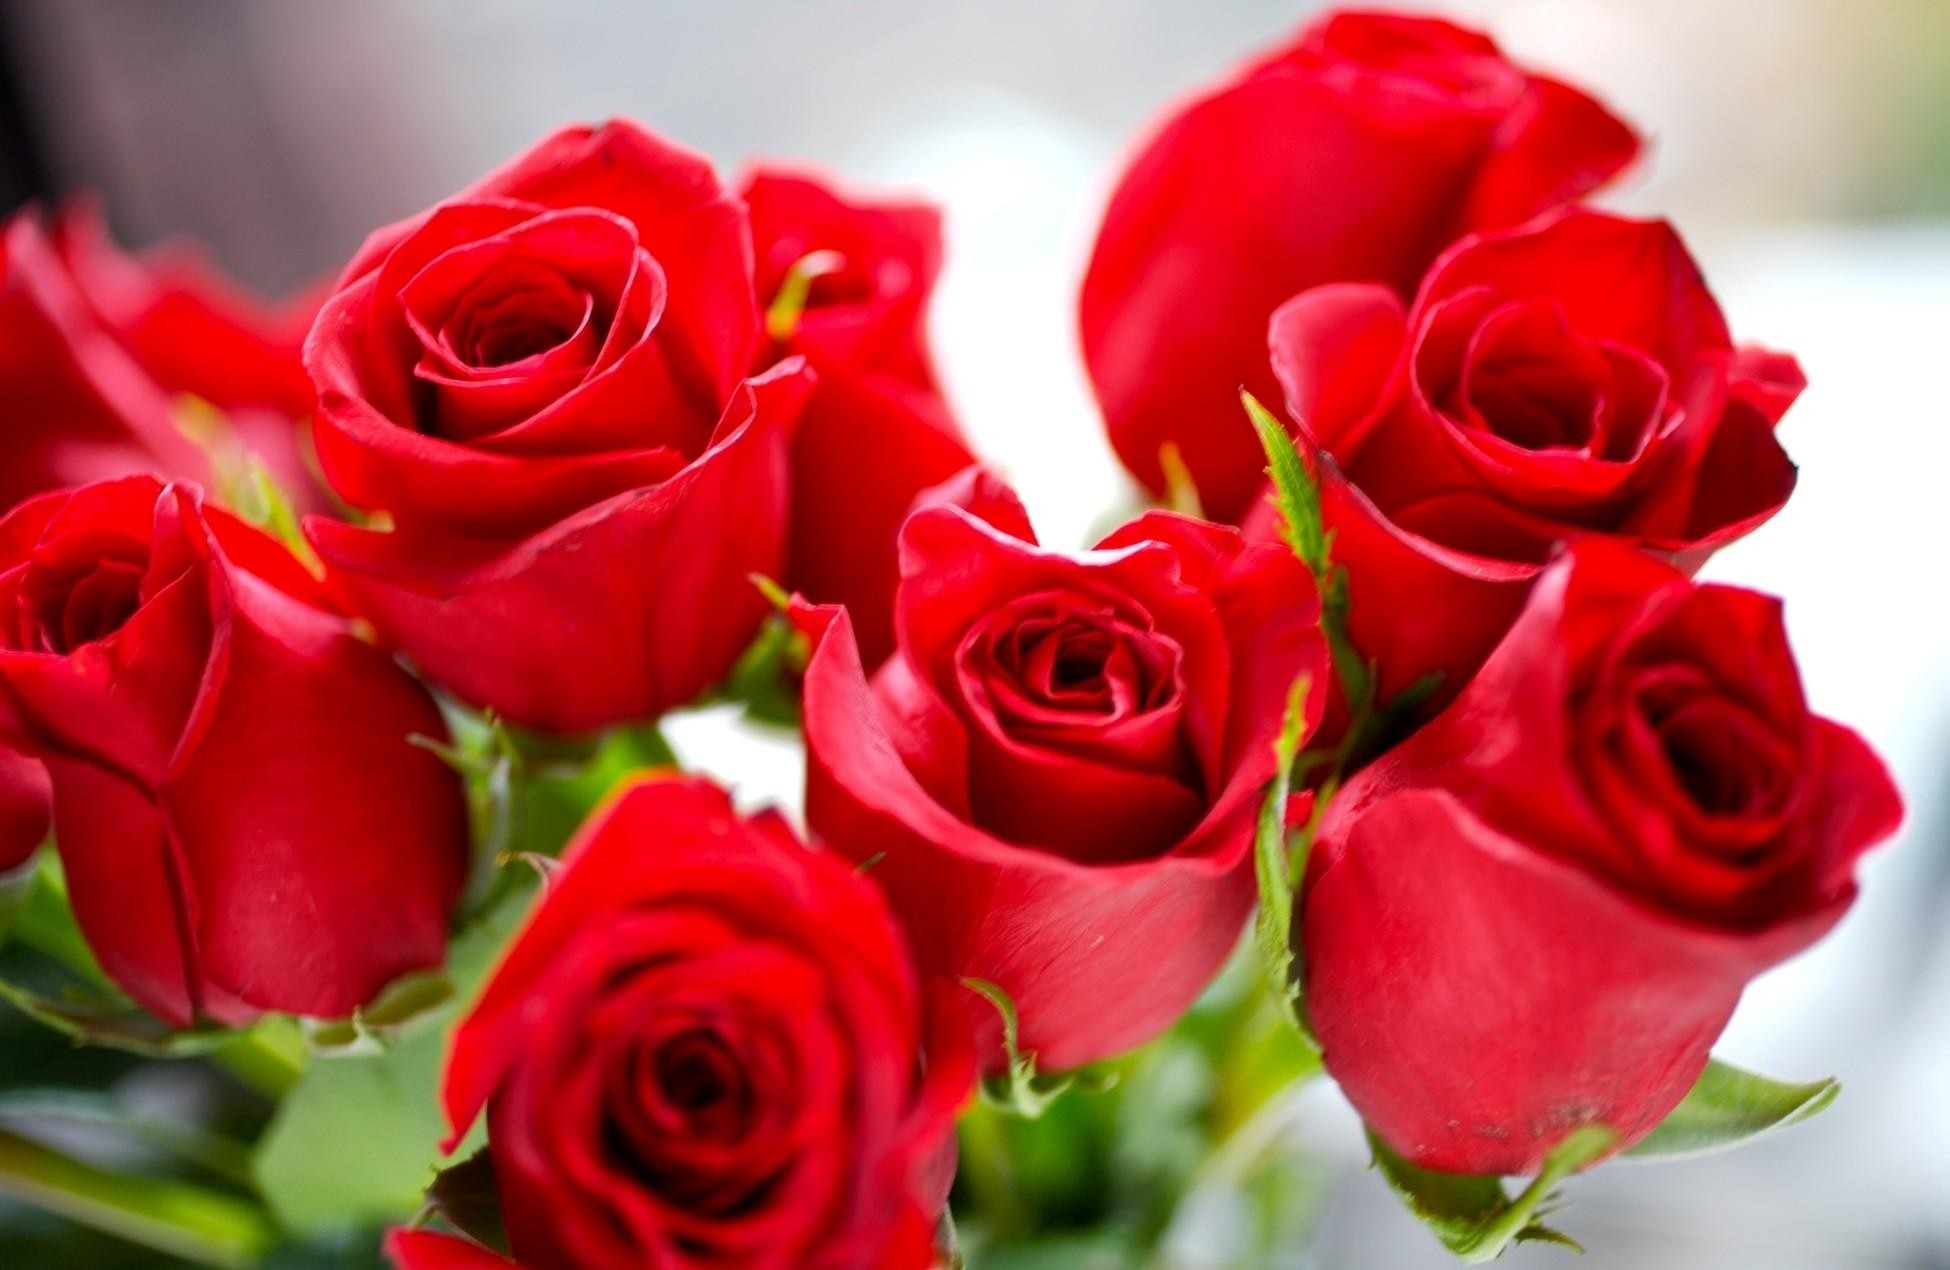 Beautiful Roses High Quality Wallpapers Gallery, Siu - Flowers Used For Perfumes - HD Wallpaper 